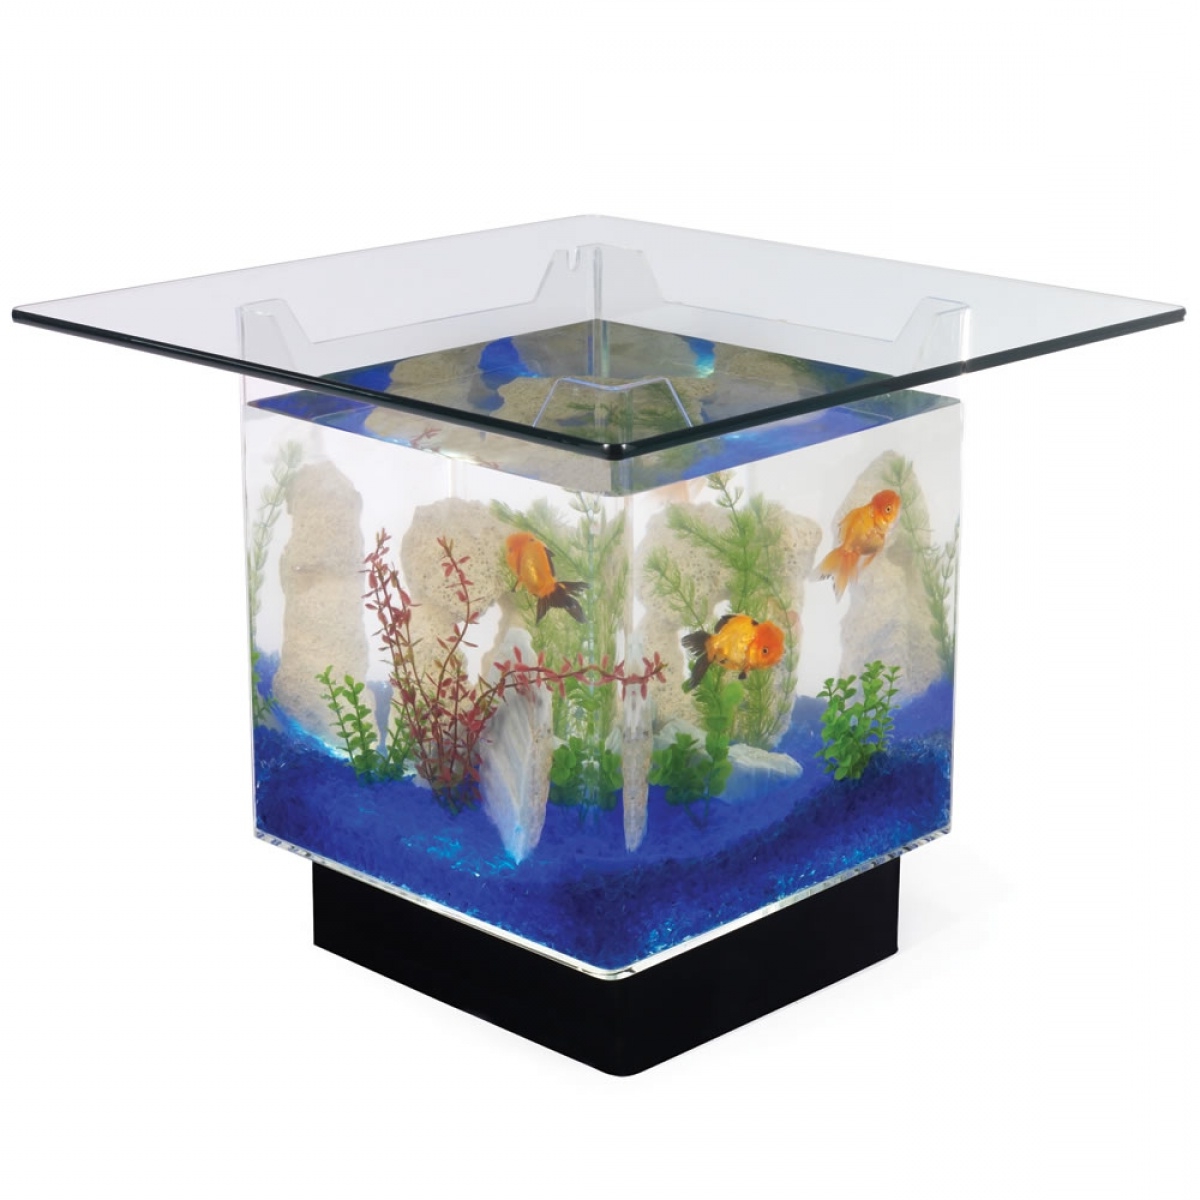 Fish Tank Coffee Table for Sale Roy Home Design